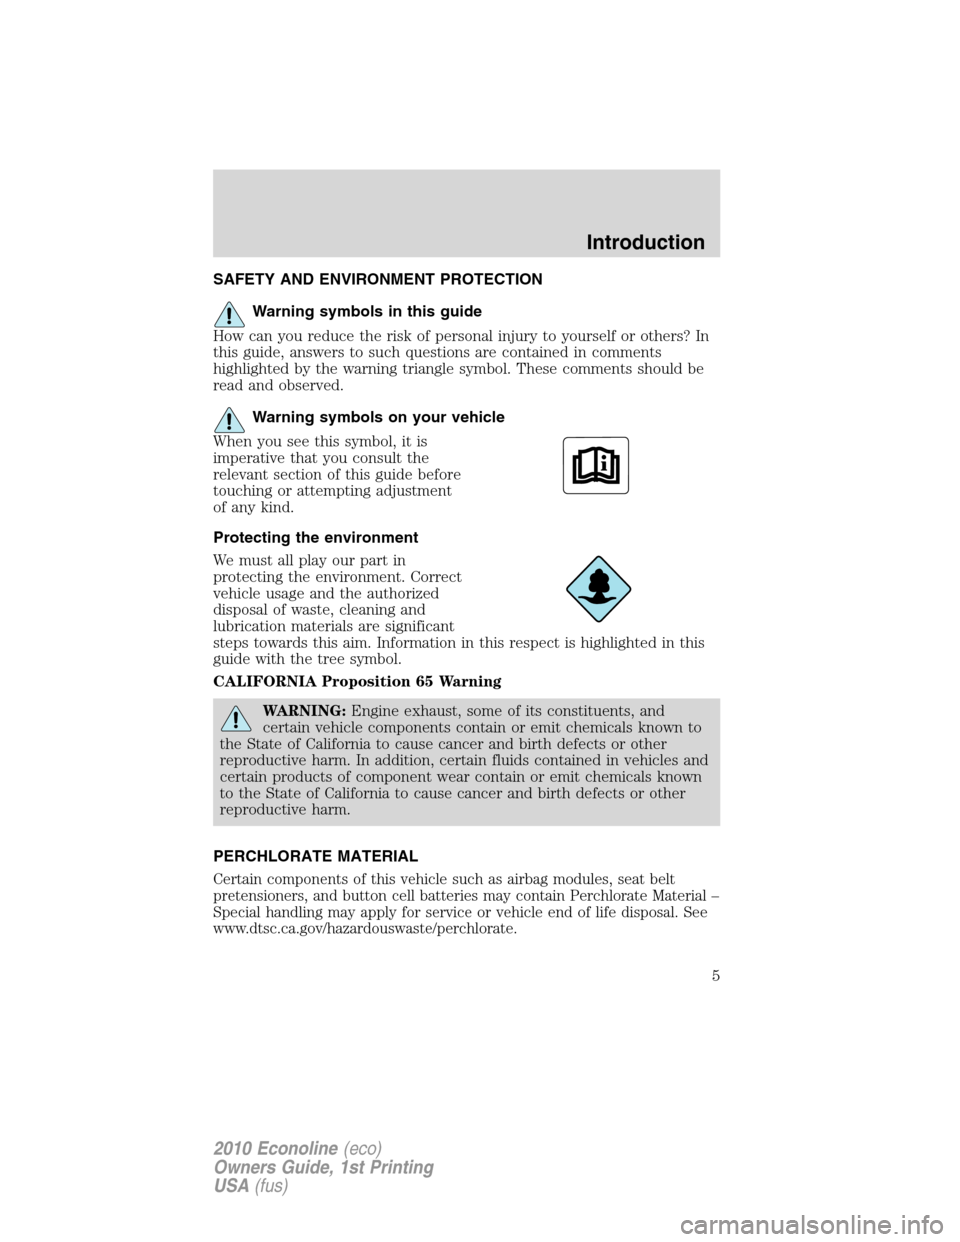 FORD E SERIES 2010 4.G Owners Manual SAFETY AND ENVIRONMENT PROTECTION
Warning symbols in this guide
How can you reduce the risk of personal injury to yourself or others? In
this guide, answers to such questions are contained in comments